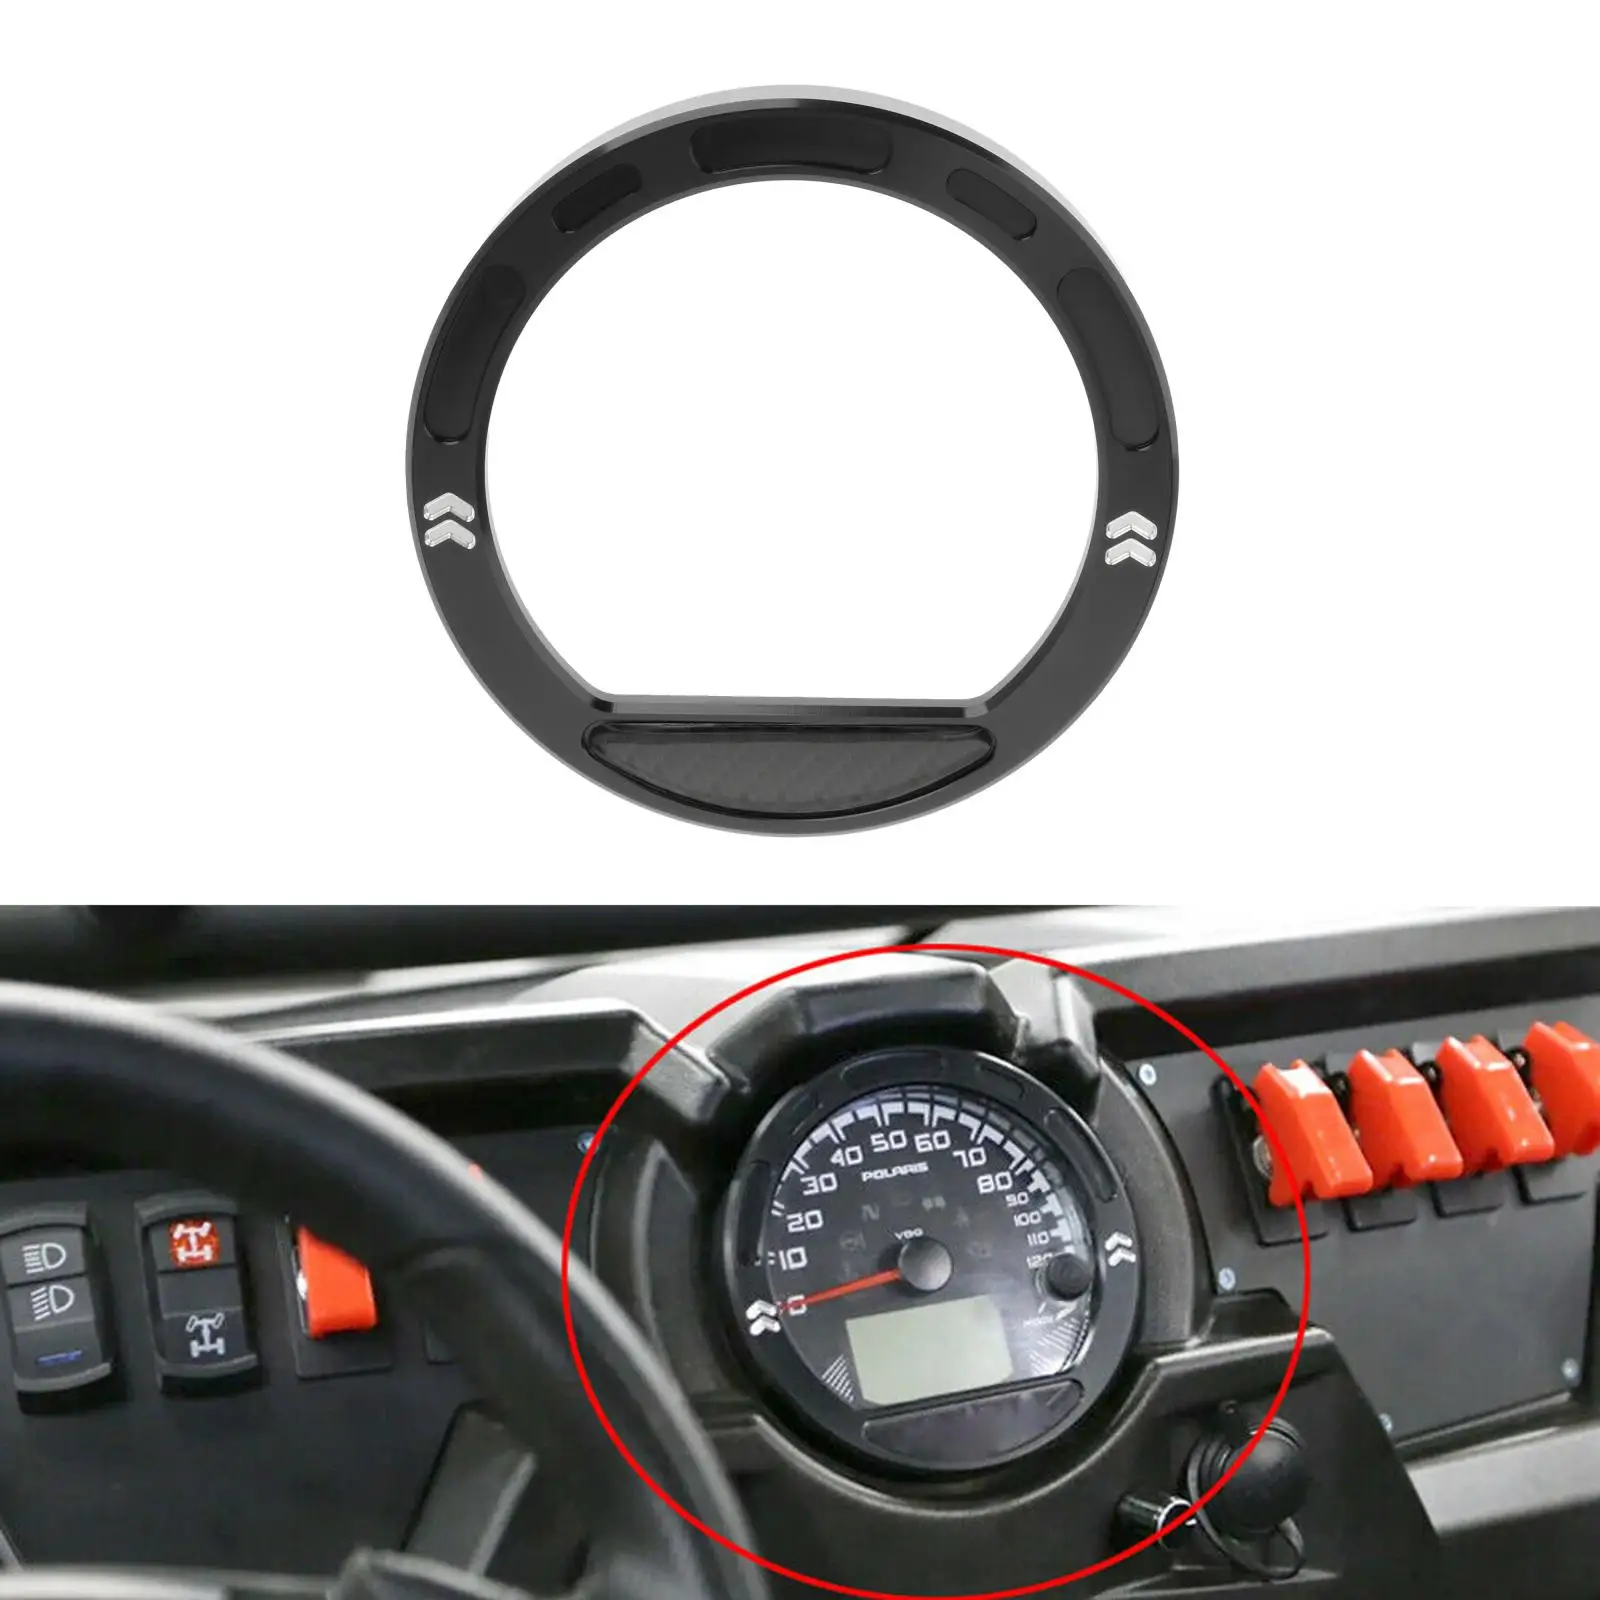 CNC Billet Motorcycle Speedometer Guage Bezel Cover Trim Ring Compatible with Polaris RZR 570 800 900 RZR 1000